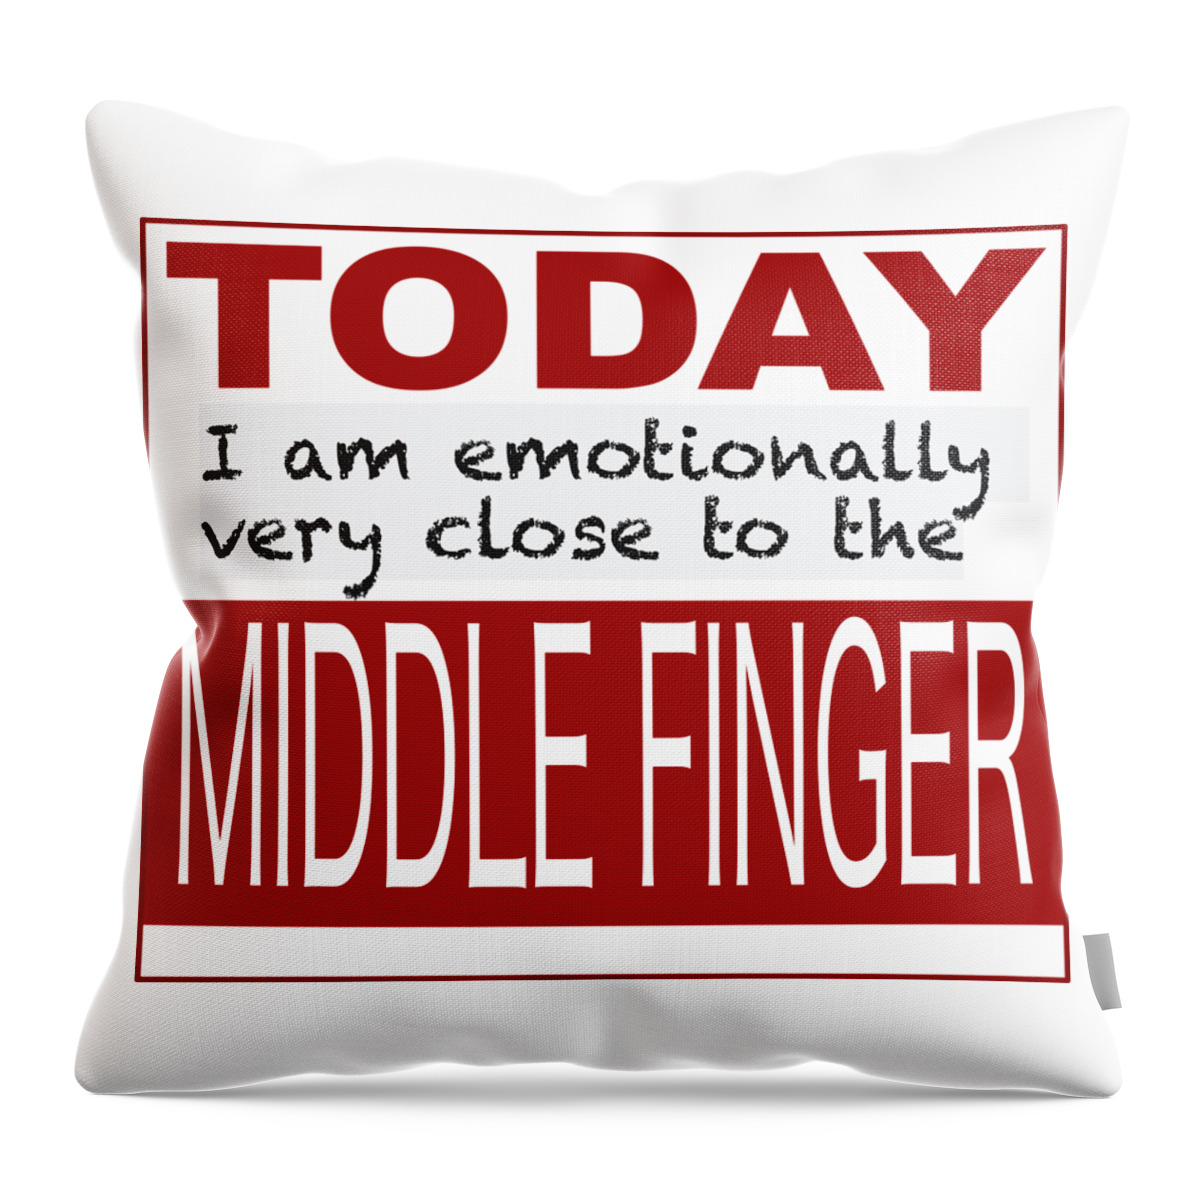 Cool. Funny Throw Pillow featuring the drawing Cool an funny saying Middle finger by Patricia Piotrak